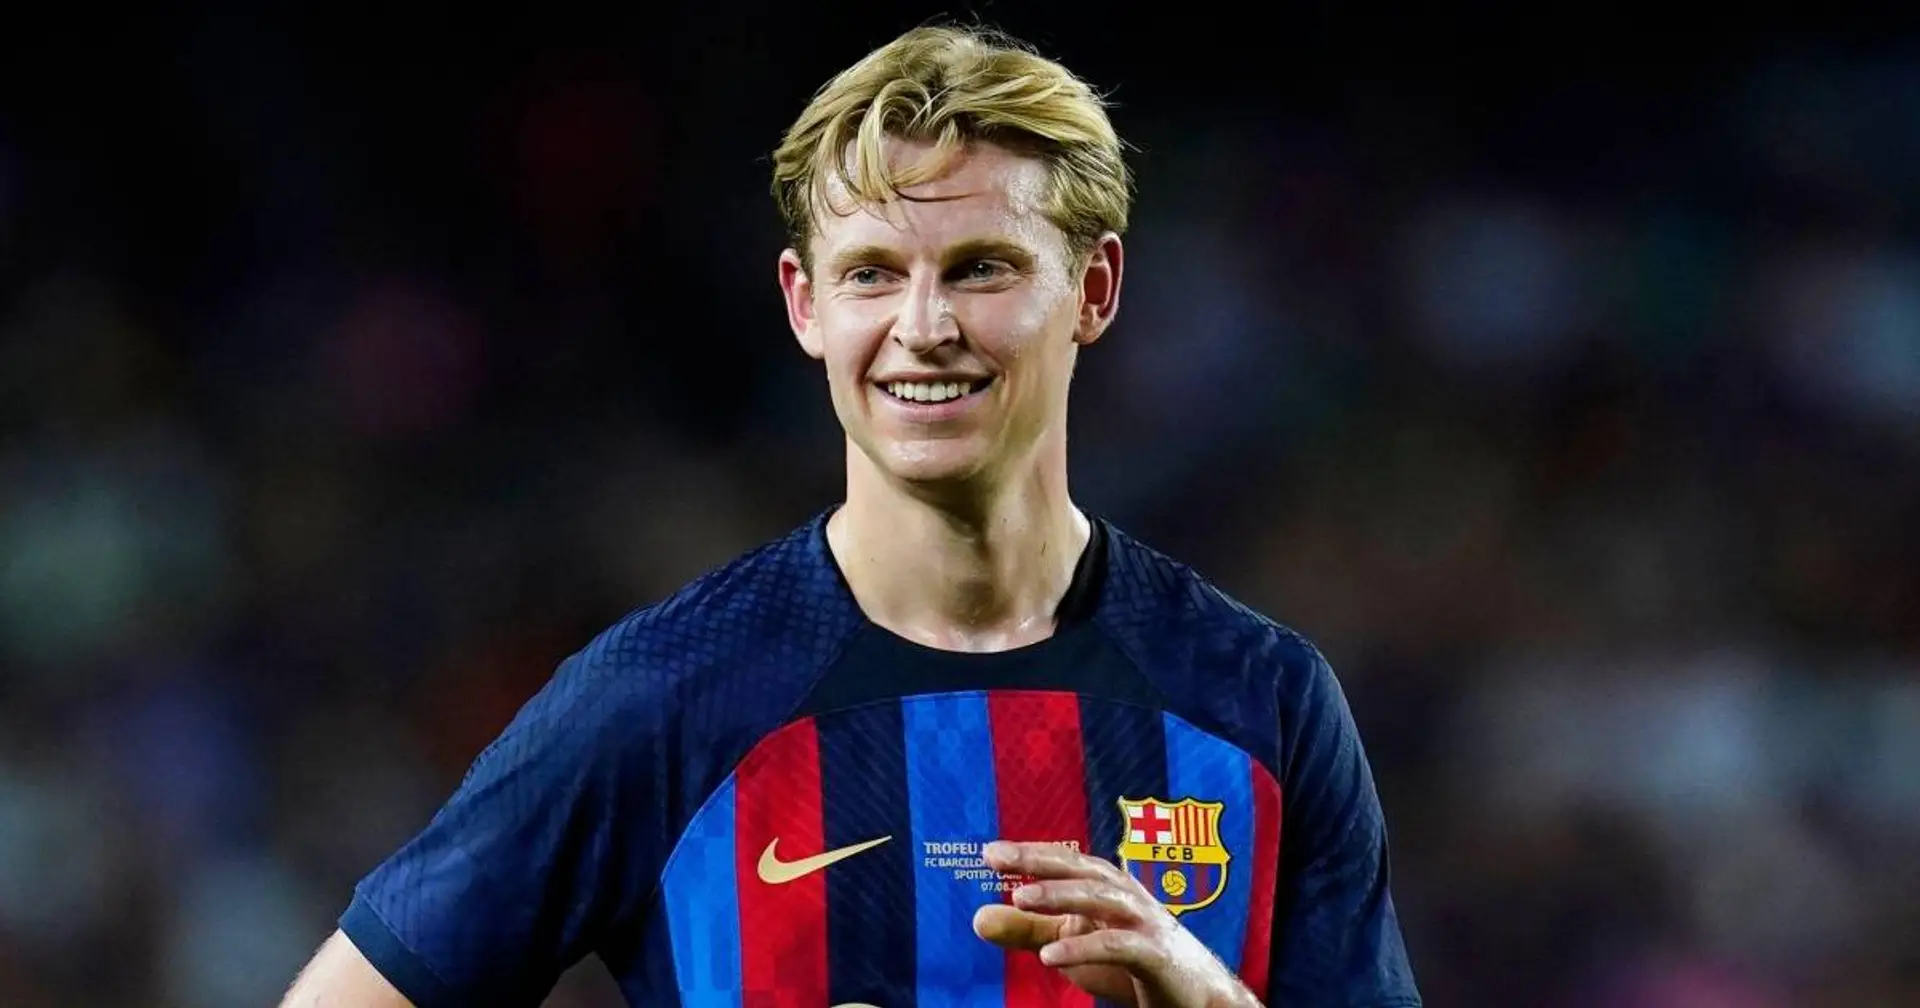 Man United face competition from Bayern Munich for Frenkie de Jong (reliability: 5 stars)